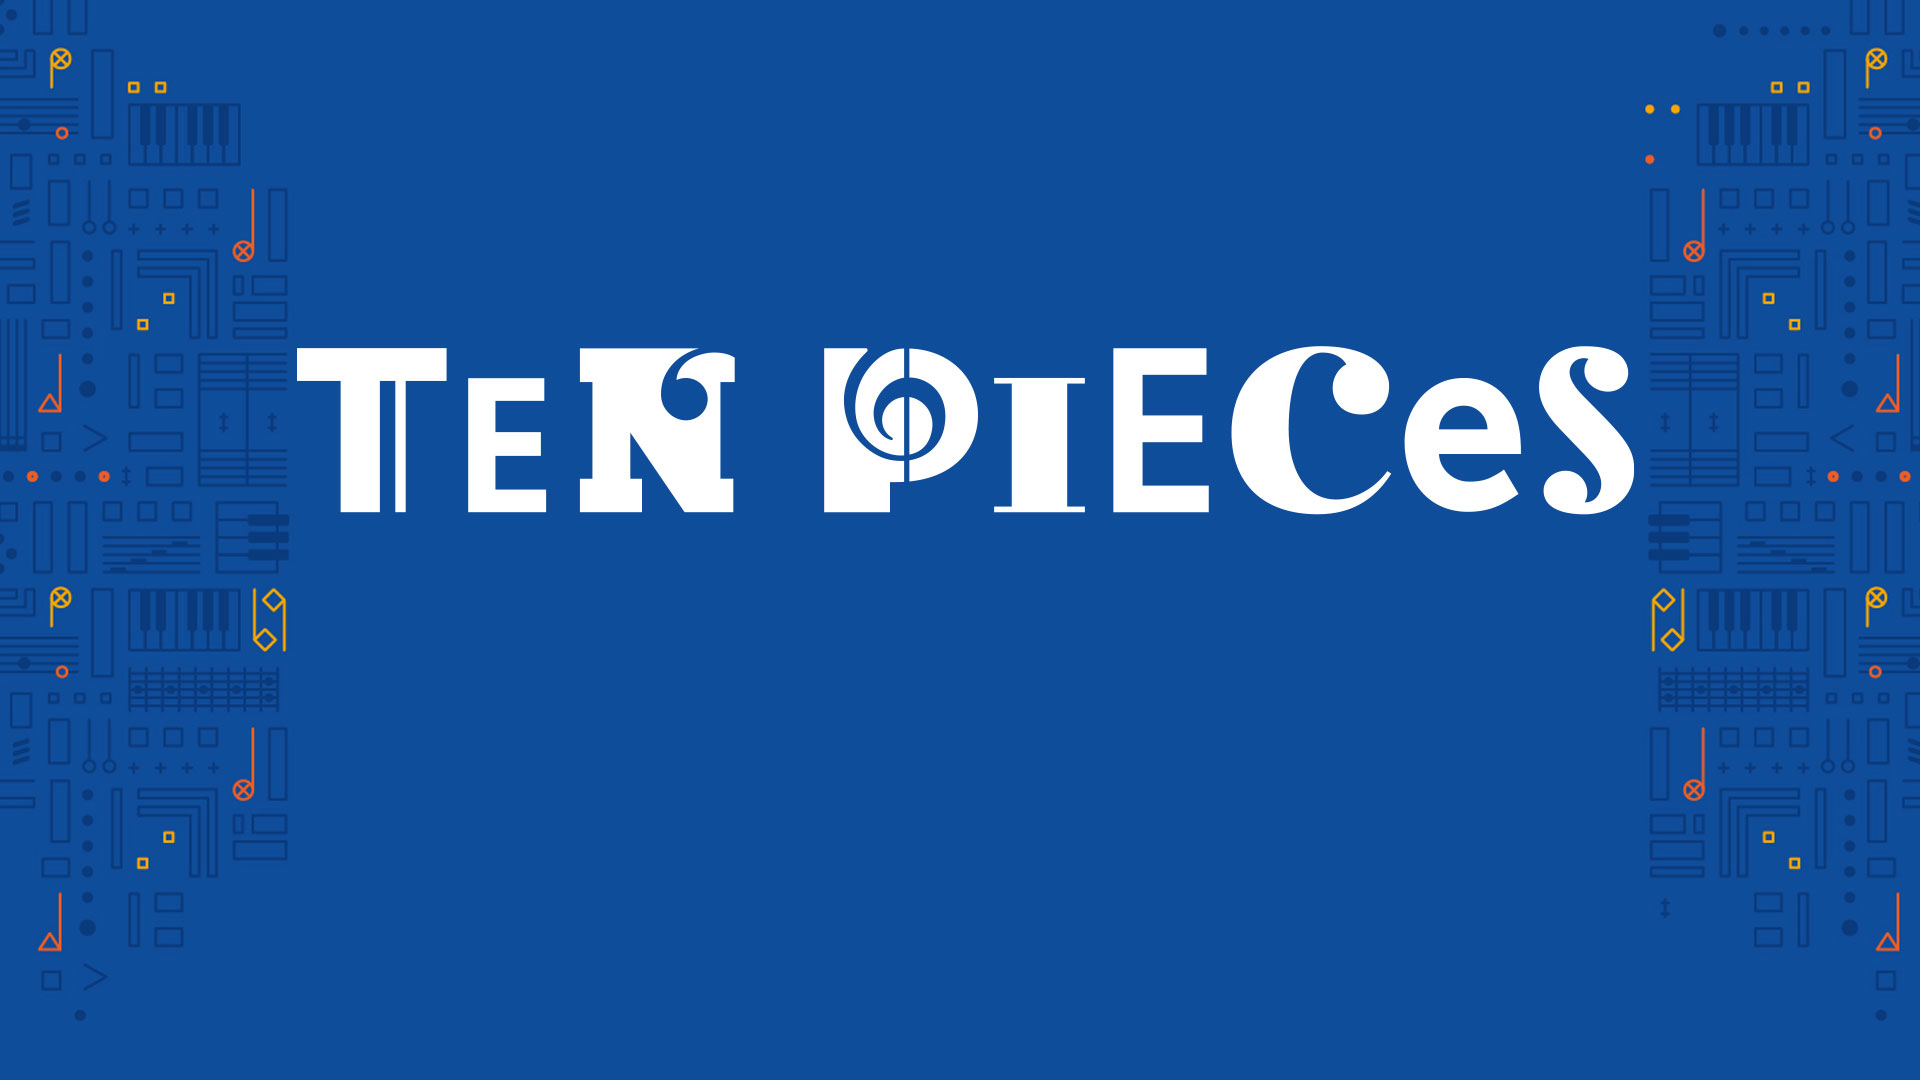 Blue banner with white text: TEN PIECES